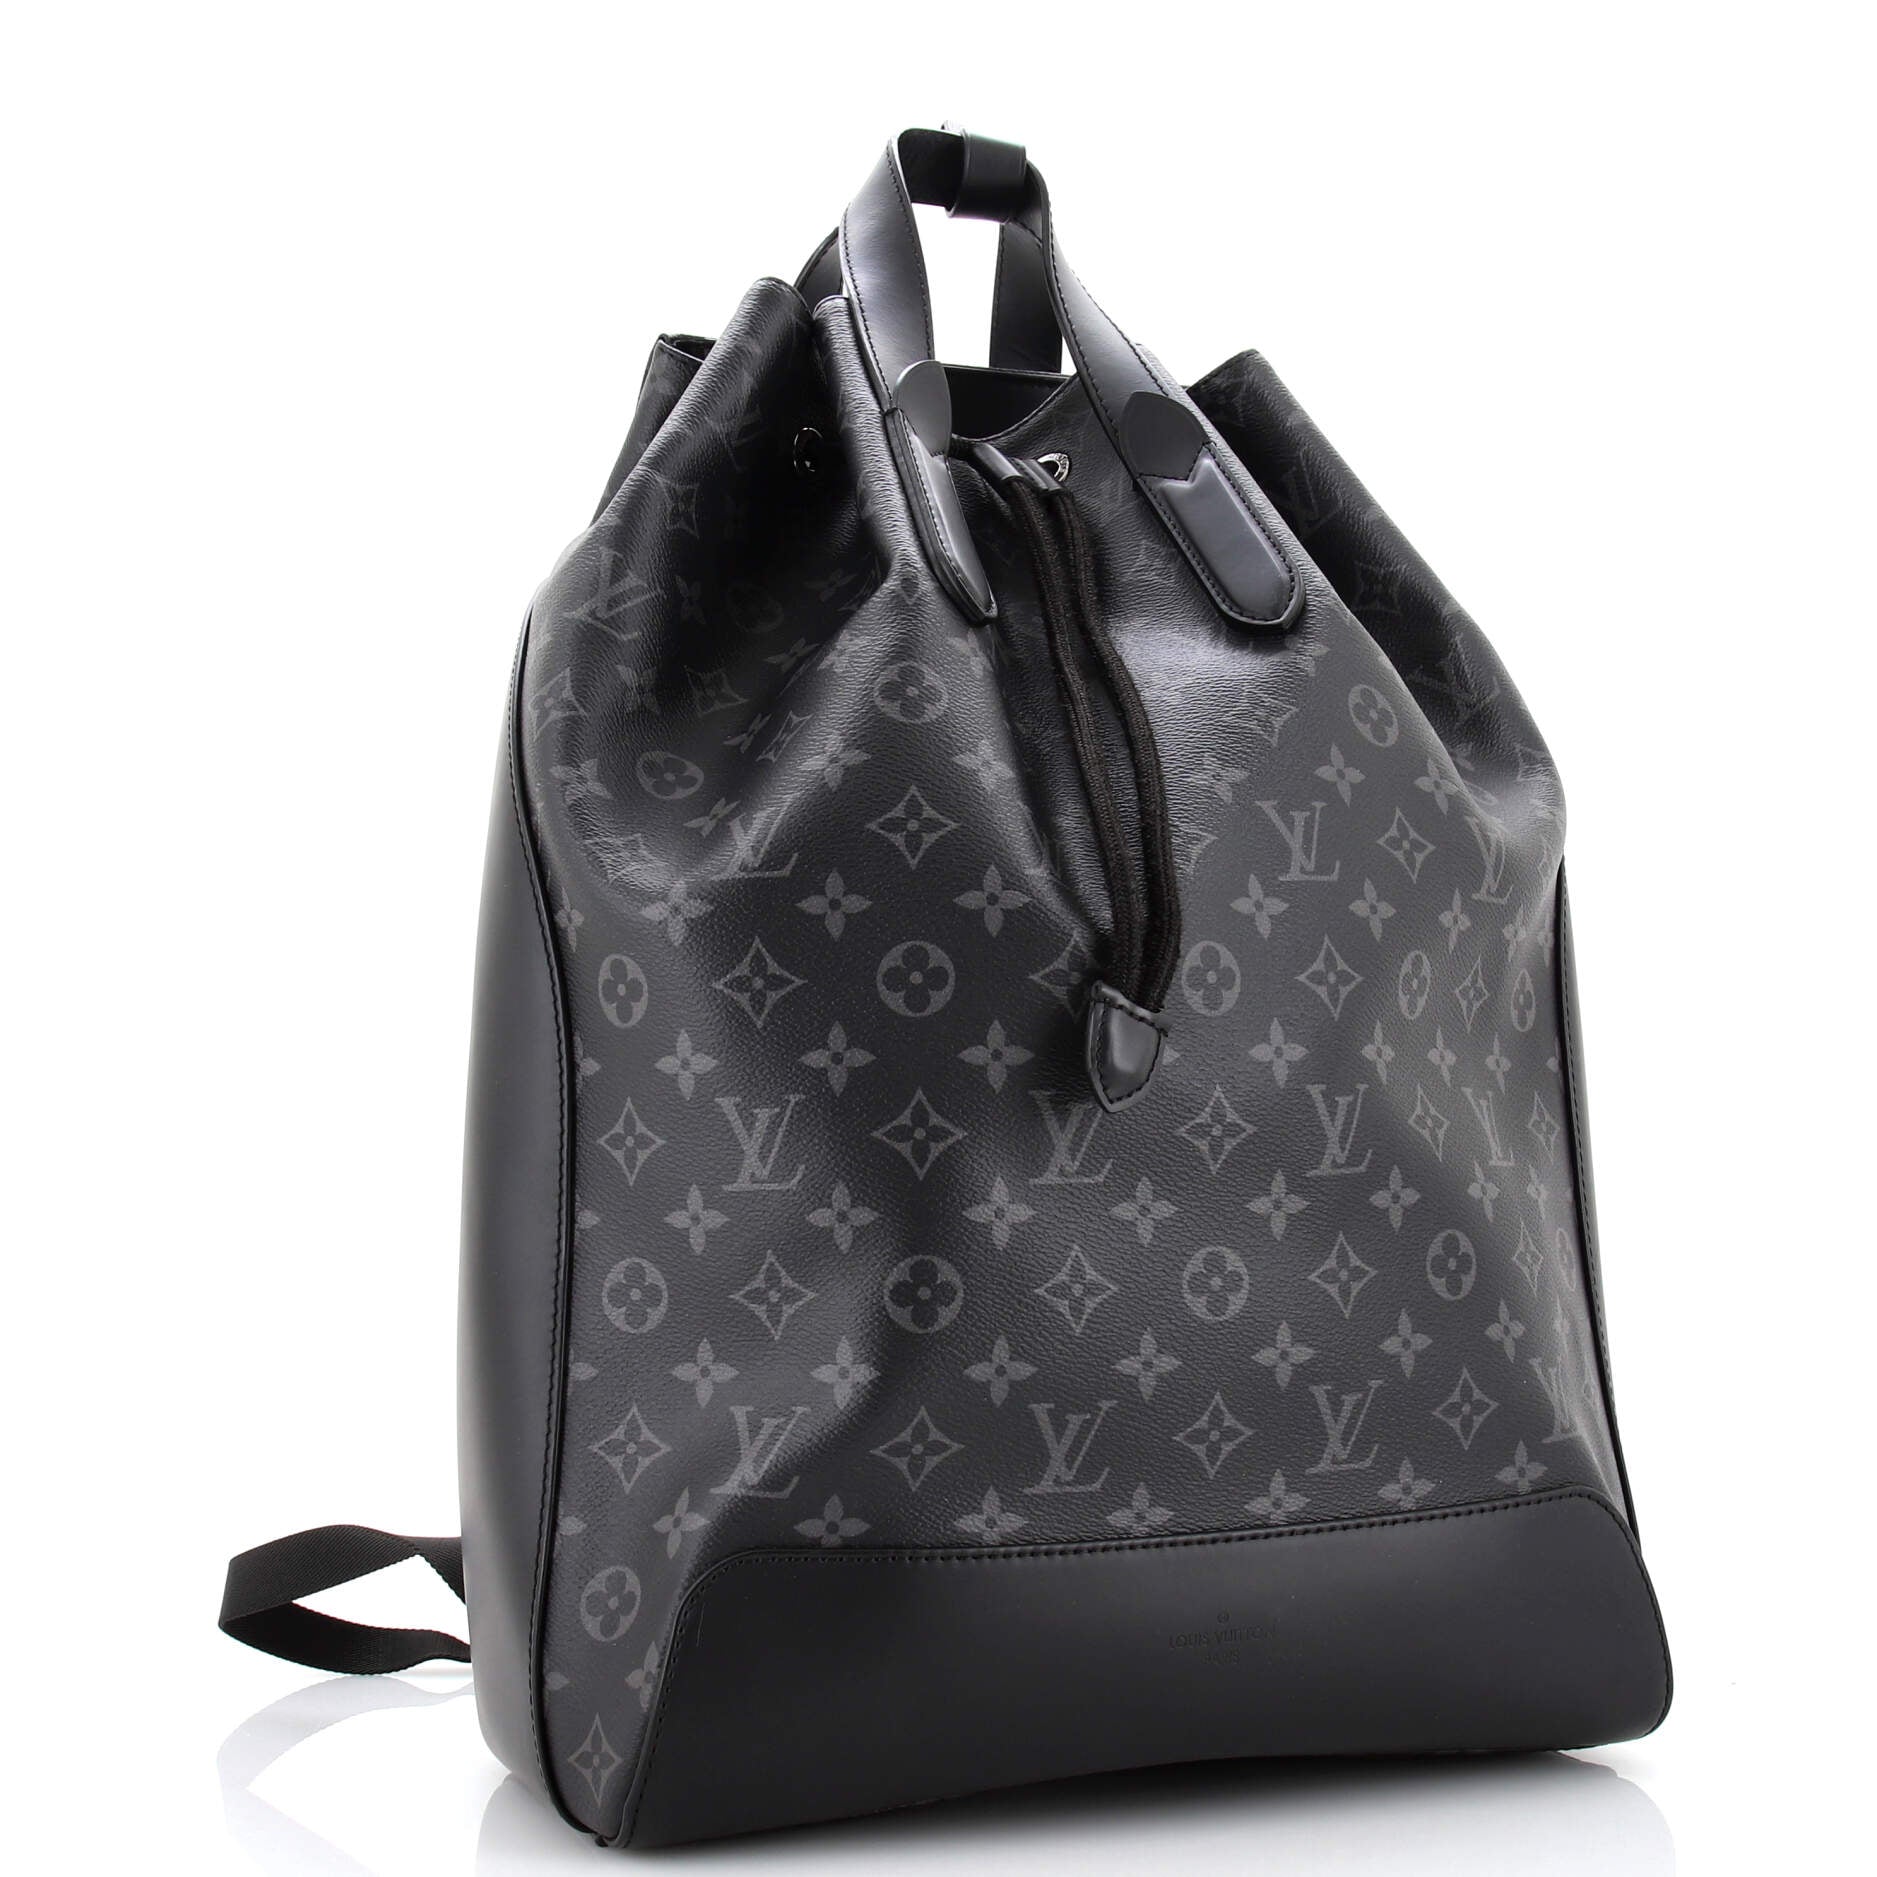 Pre-Owned Louis Vuitton Christopher Backpack 178364/381 | Rebag